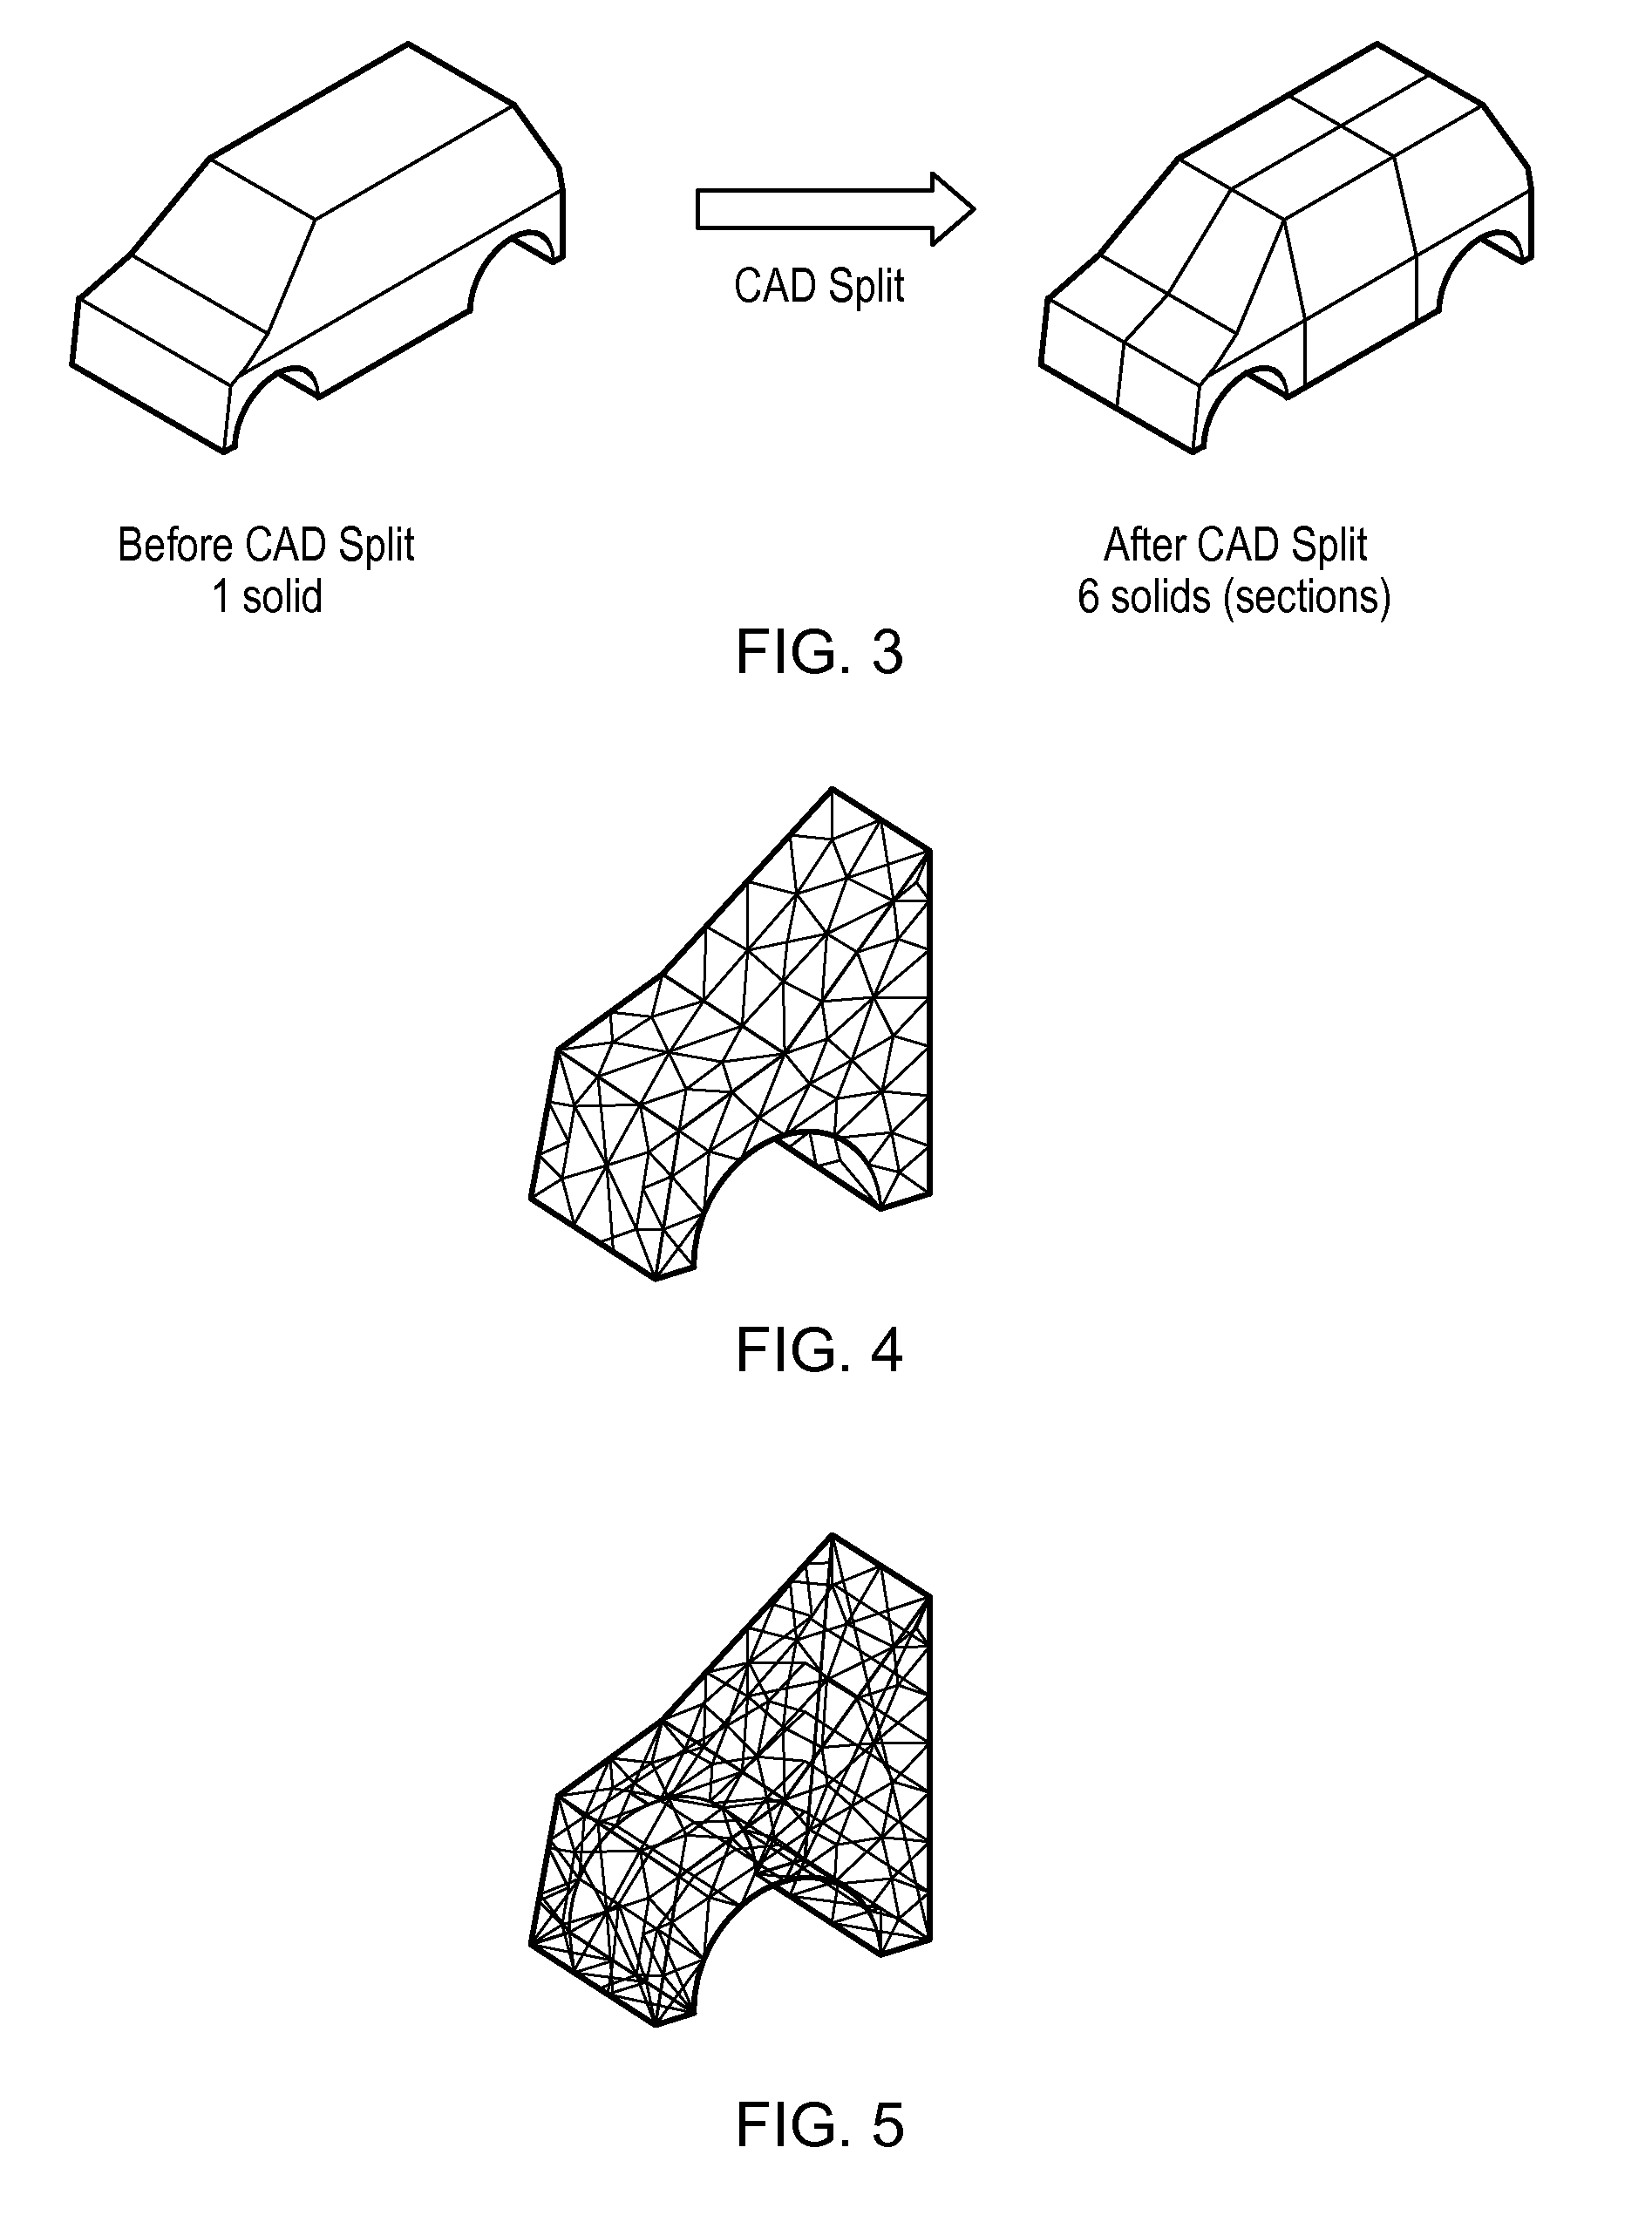 Decoupled parallel meshing in computer aided design